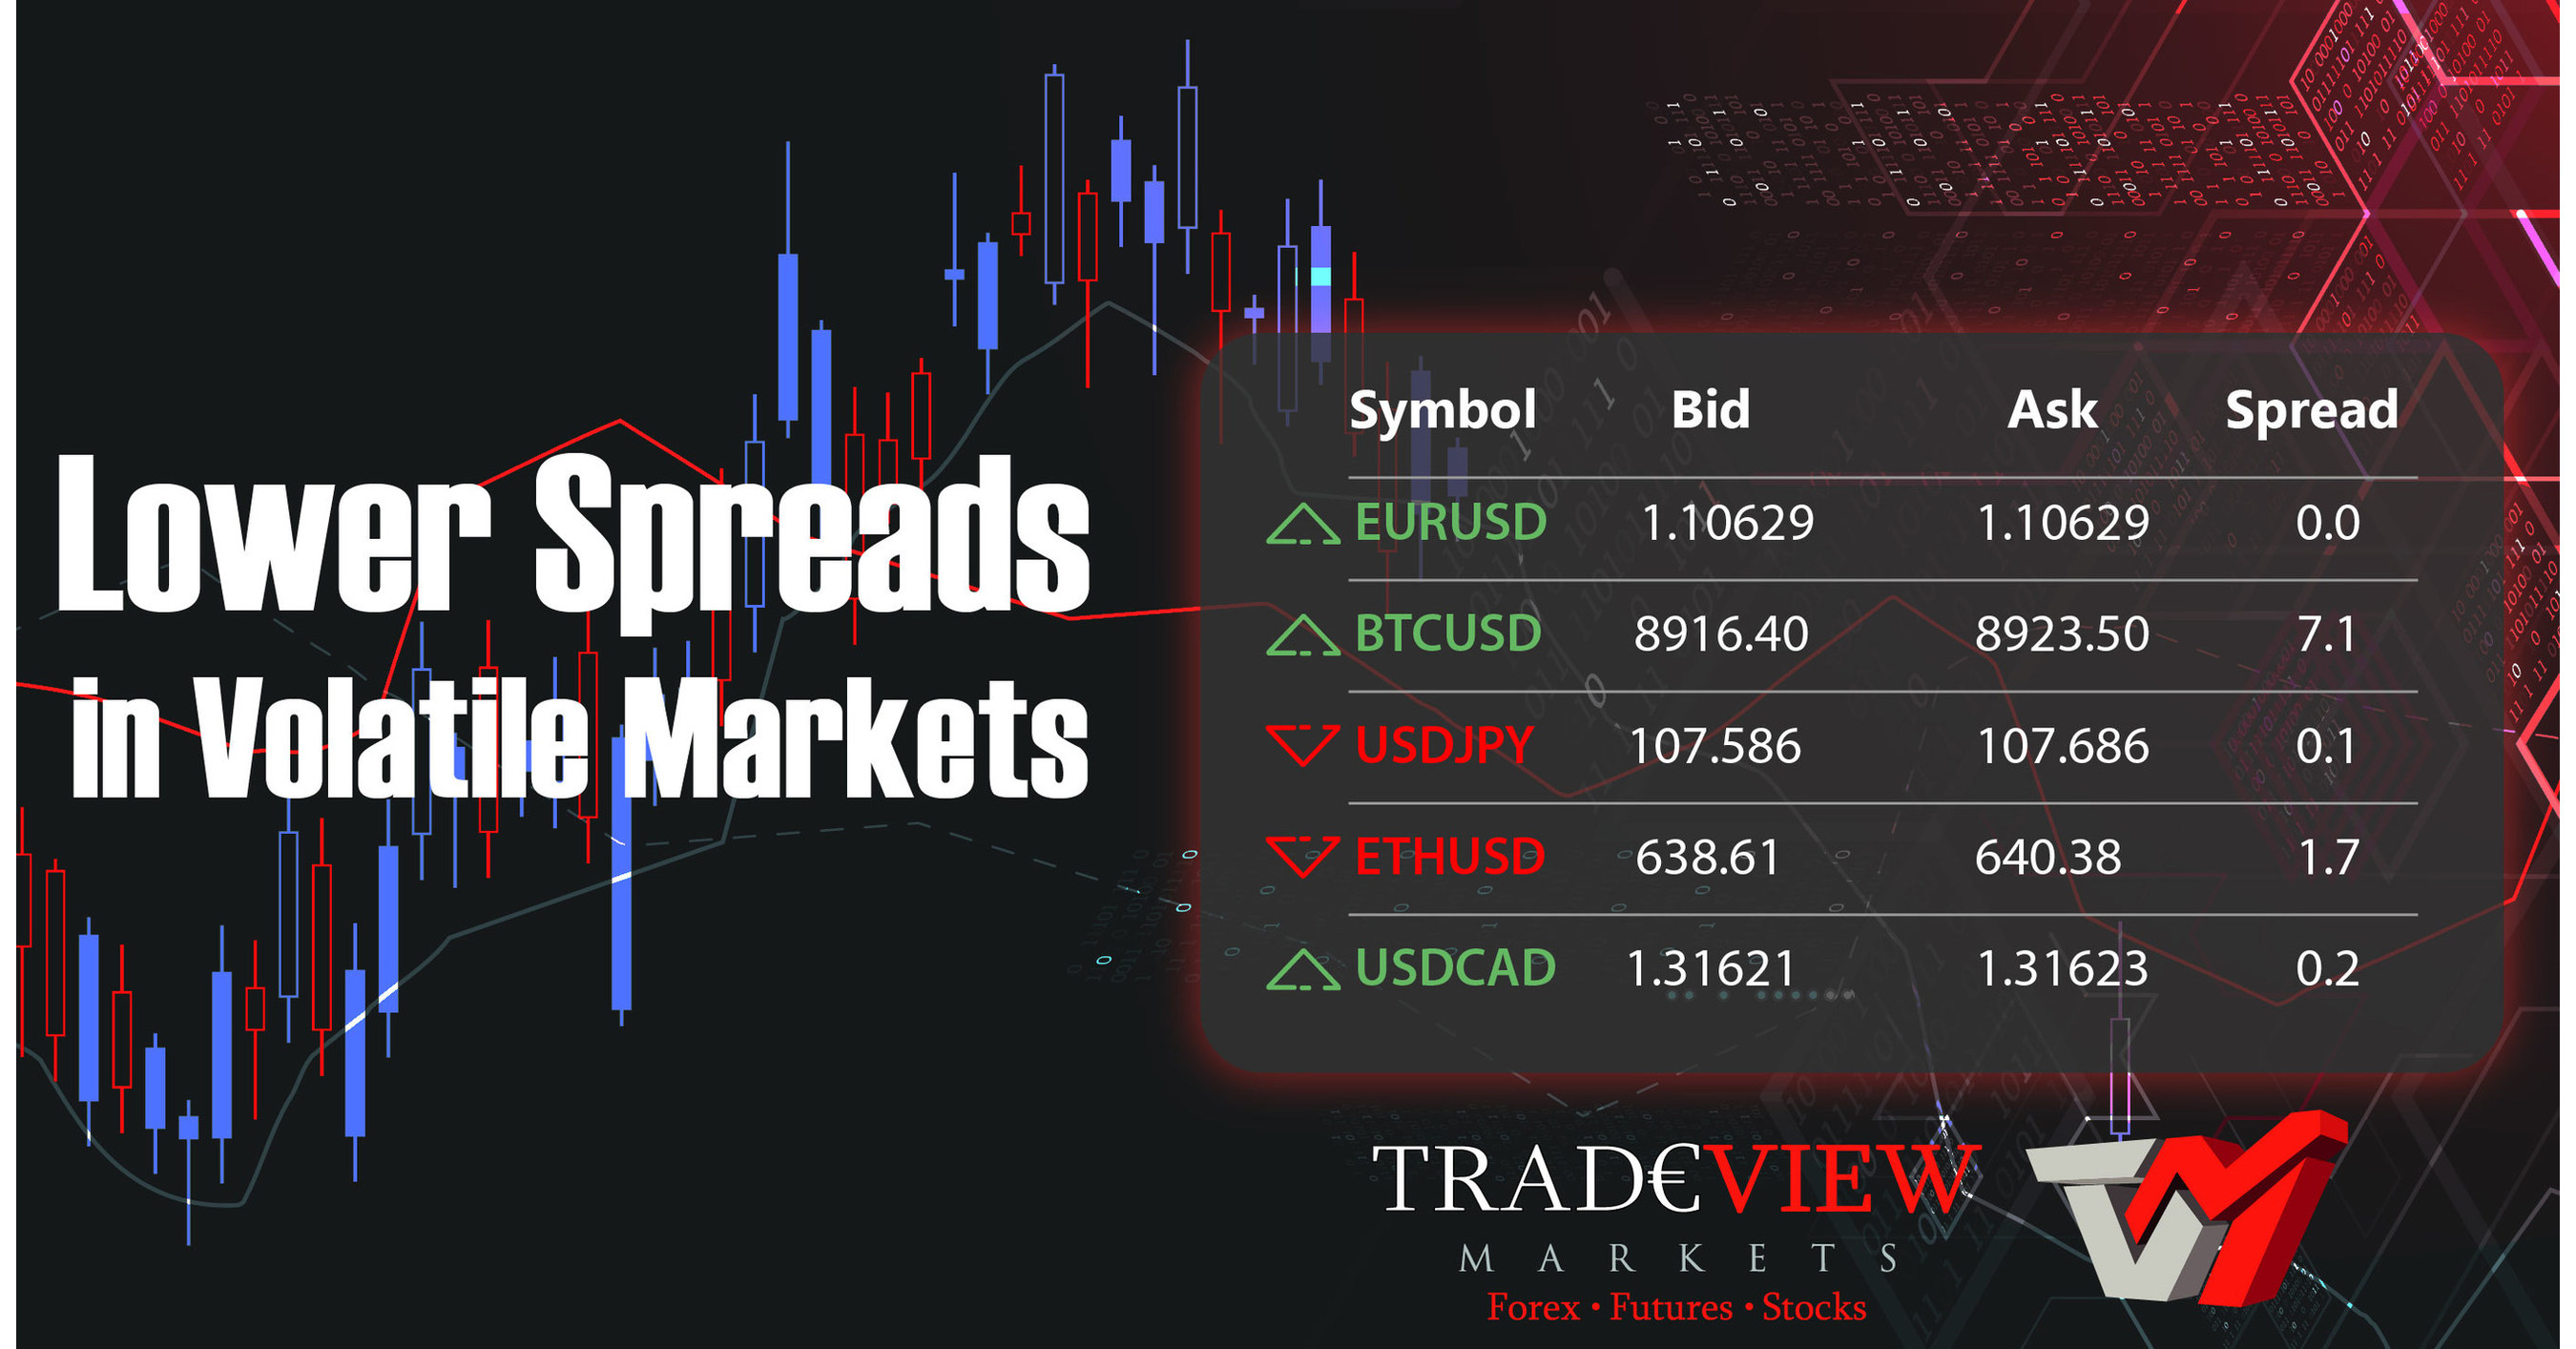 Tradeview Markets Announce Lower Spreads in Volatile Markets